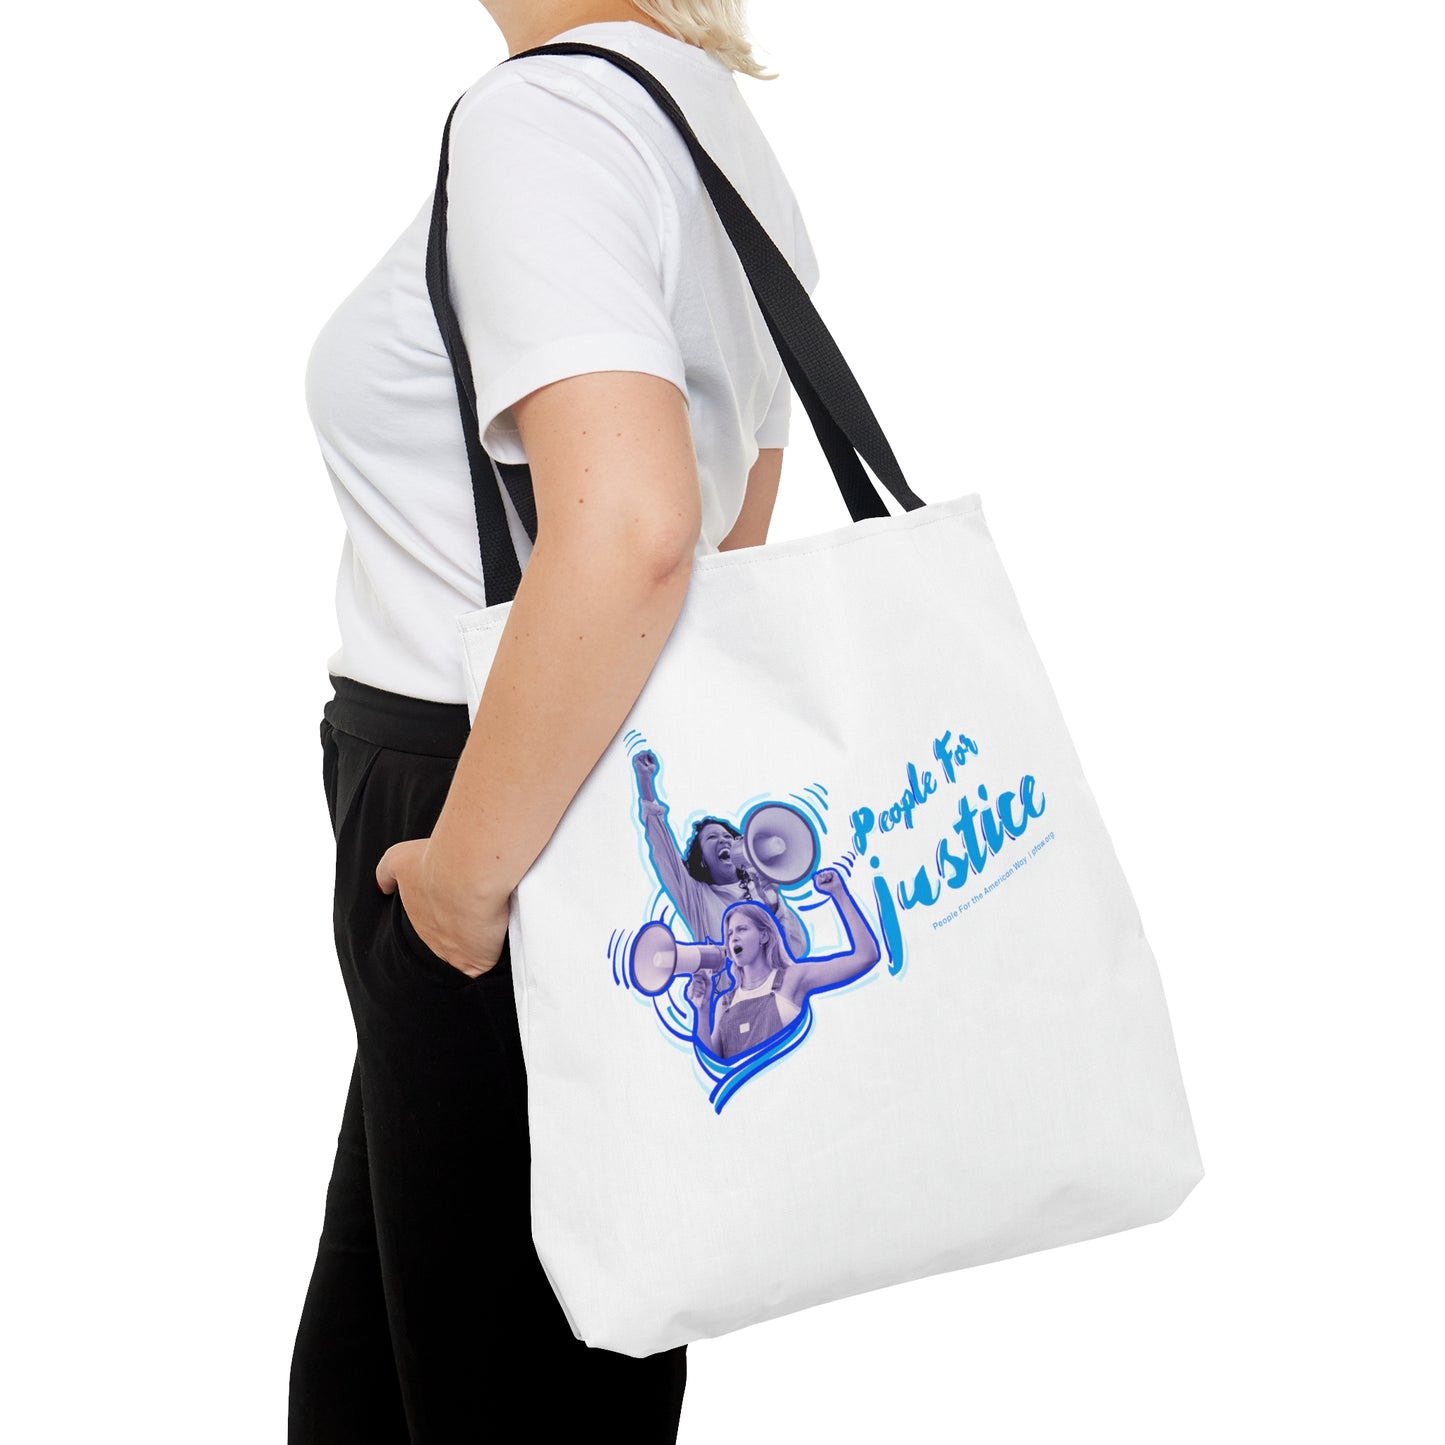 People For Justice Tote - White